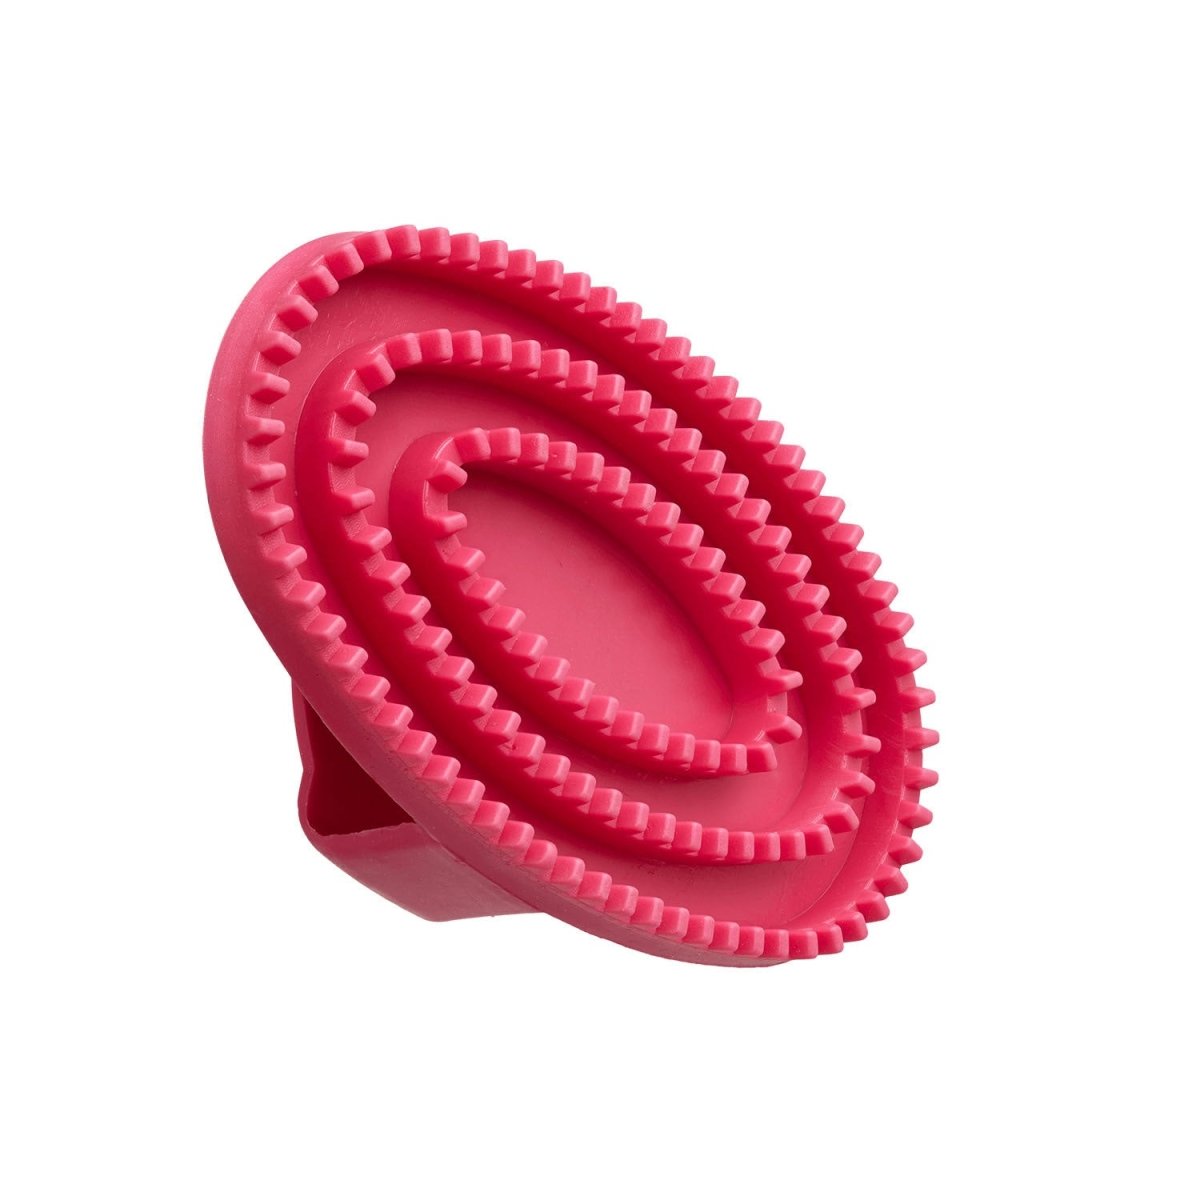 Bitz Curry Comb Rubber Small - Pink - Small